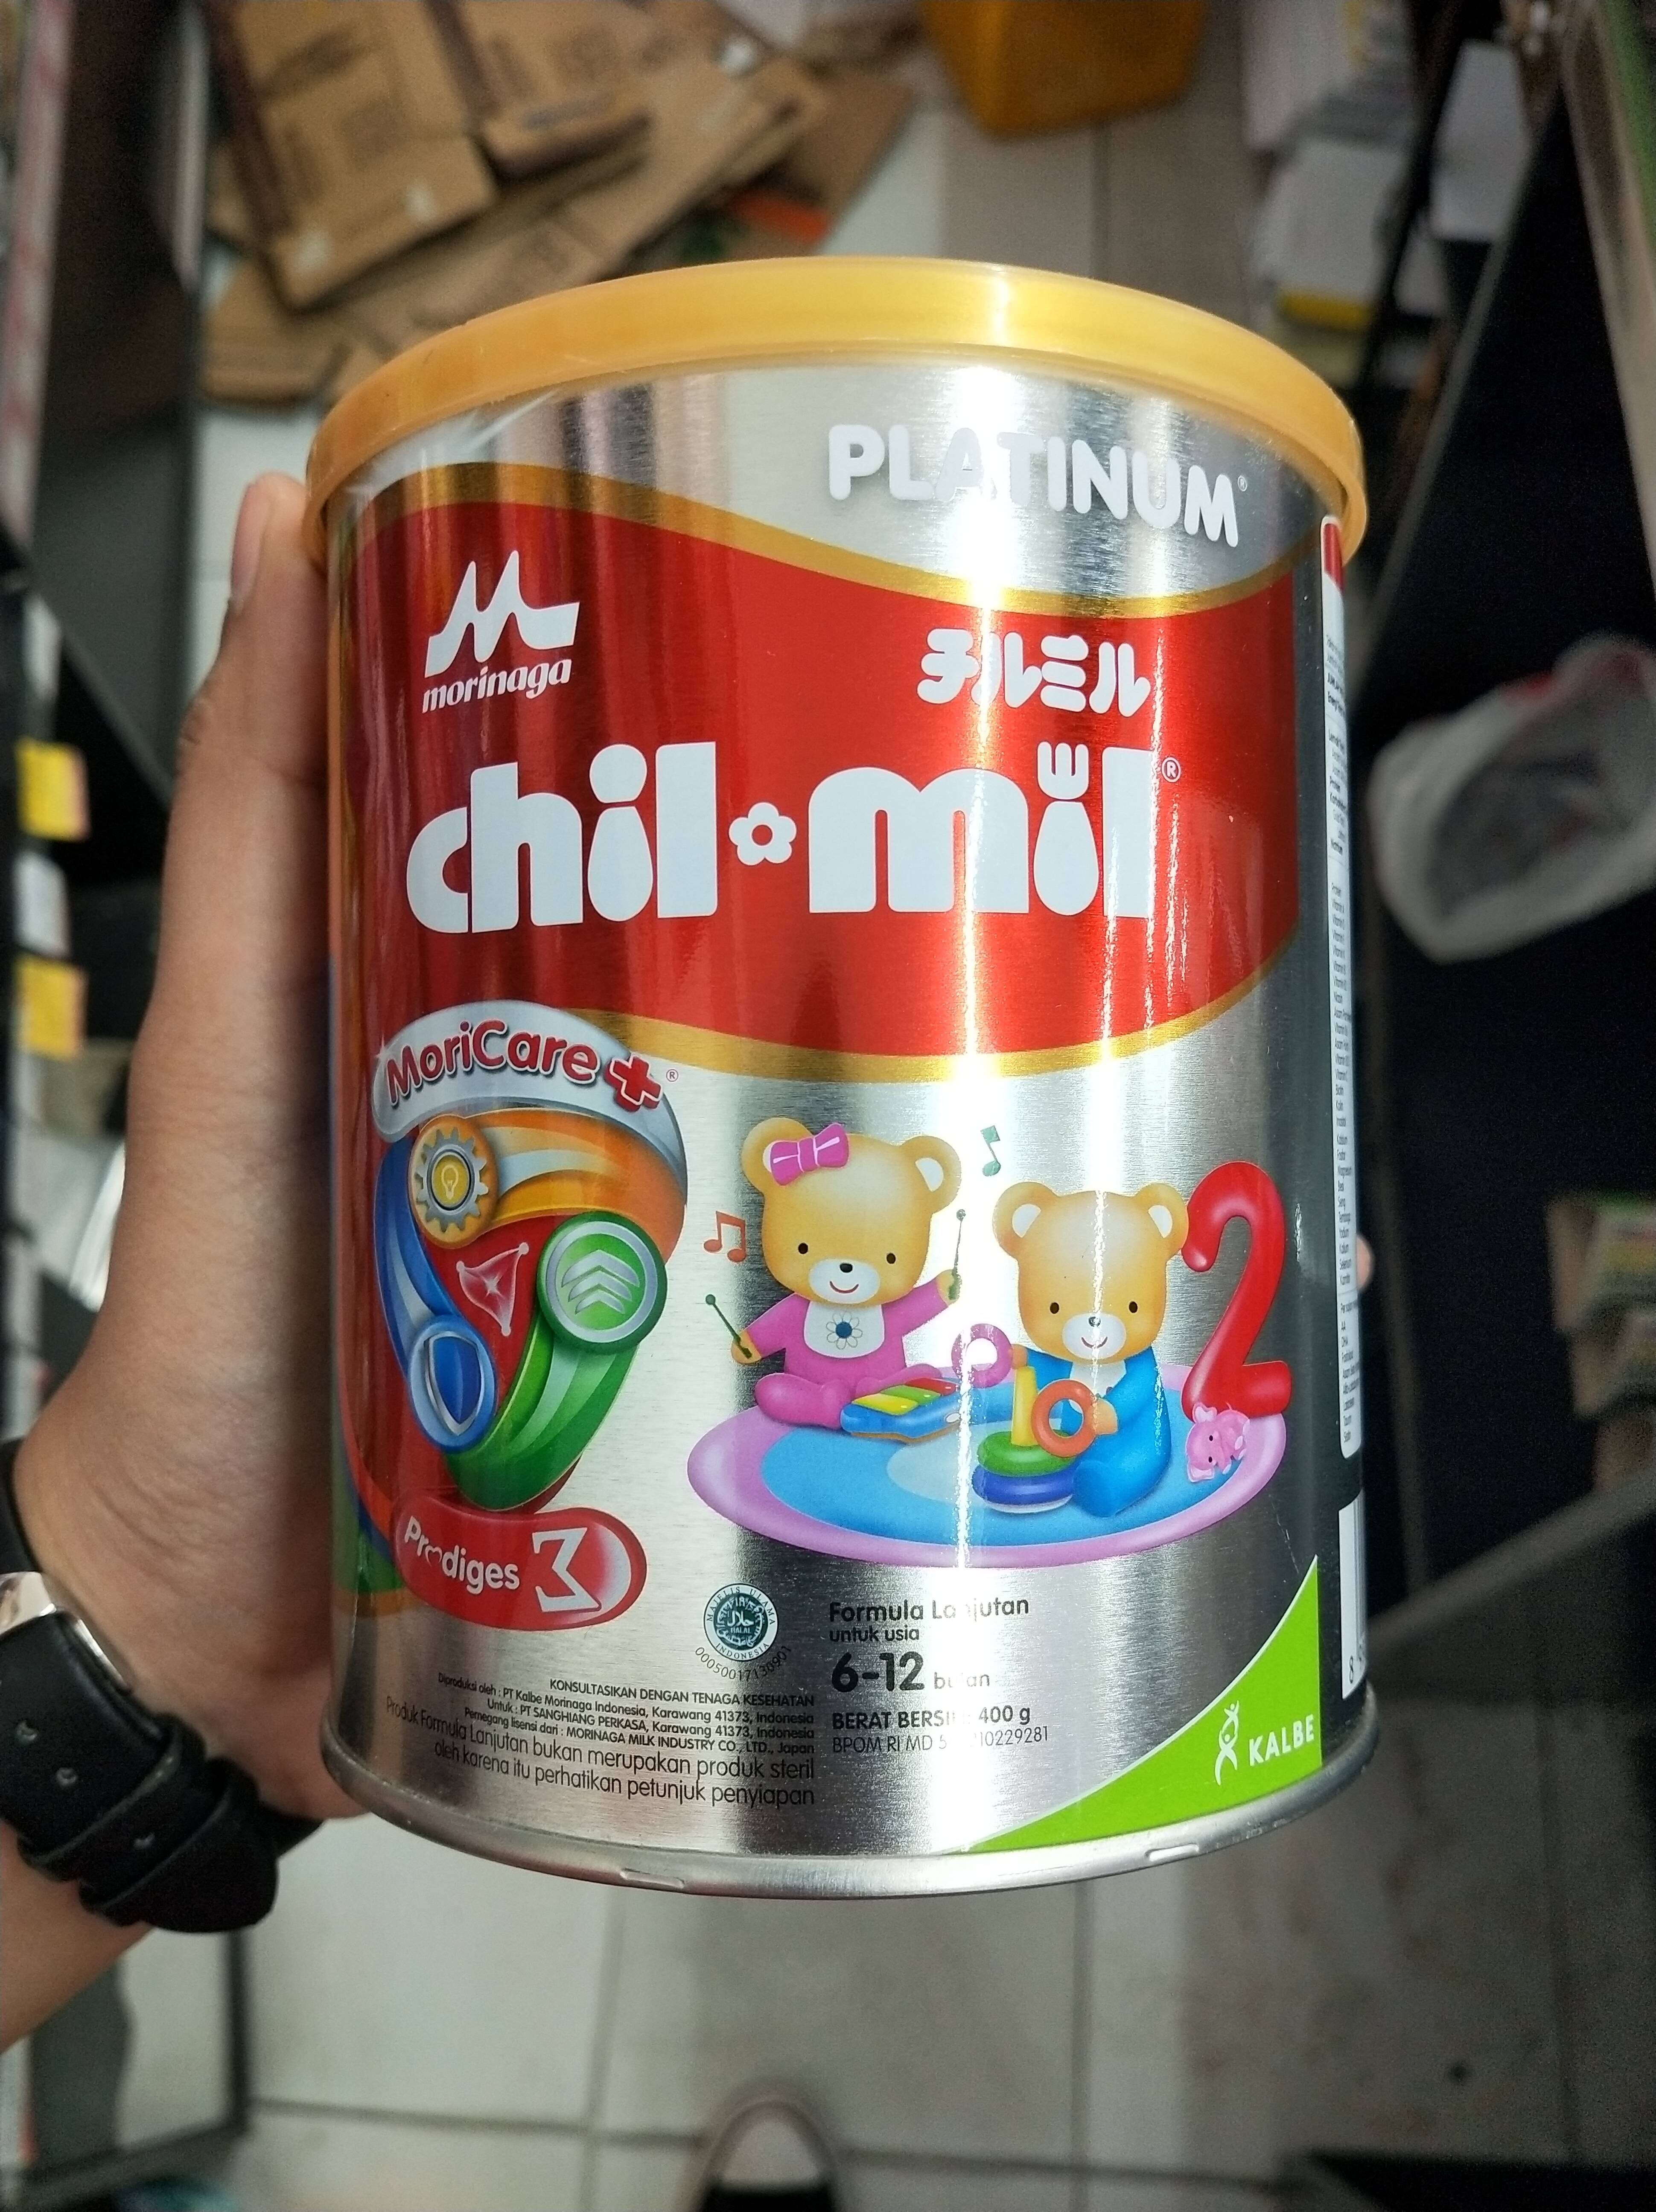 Chil-mil 2 PLT can 400 g (Ifo) - Produk